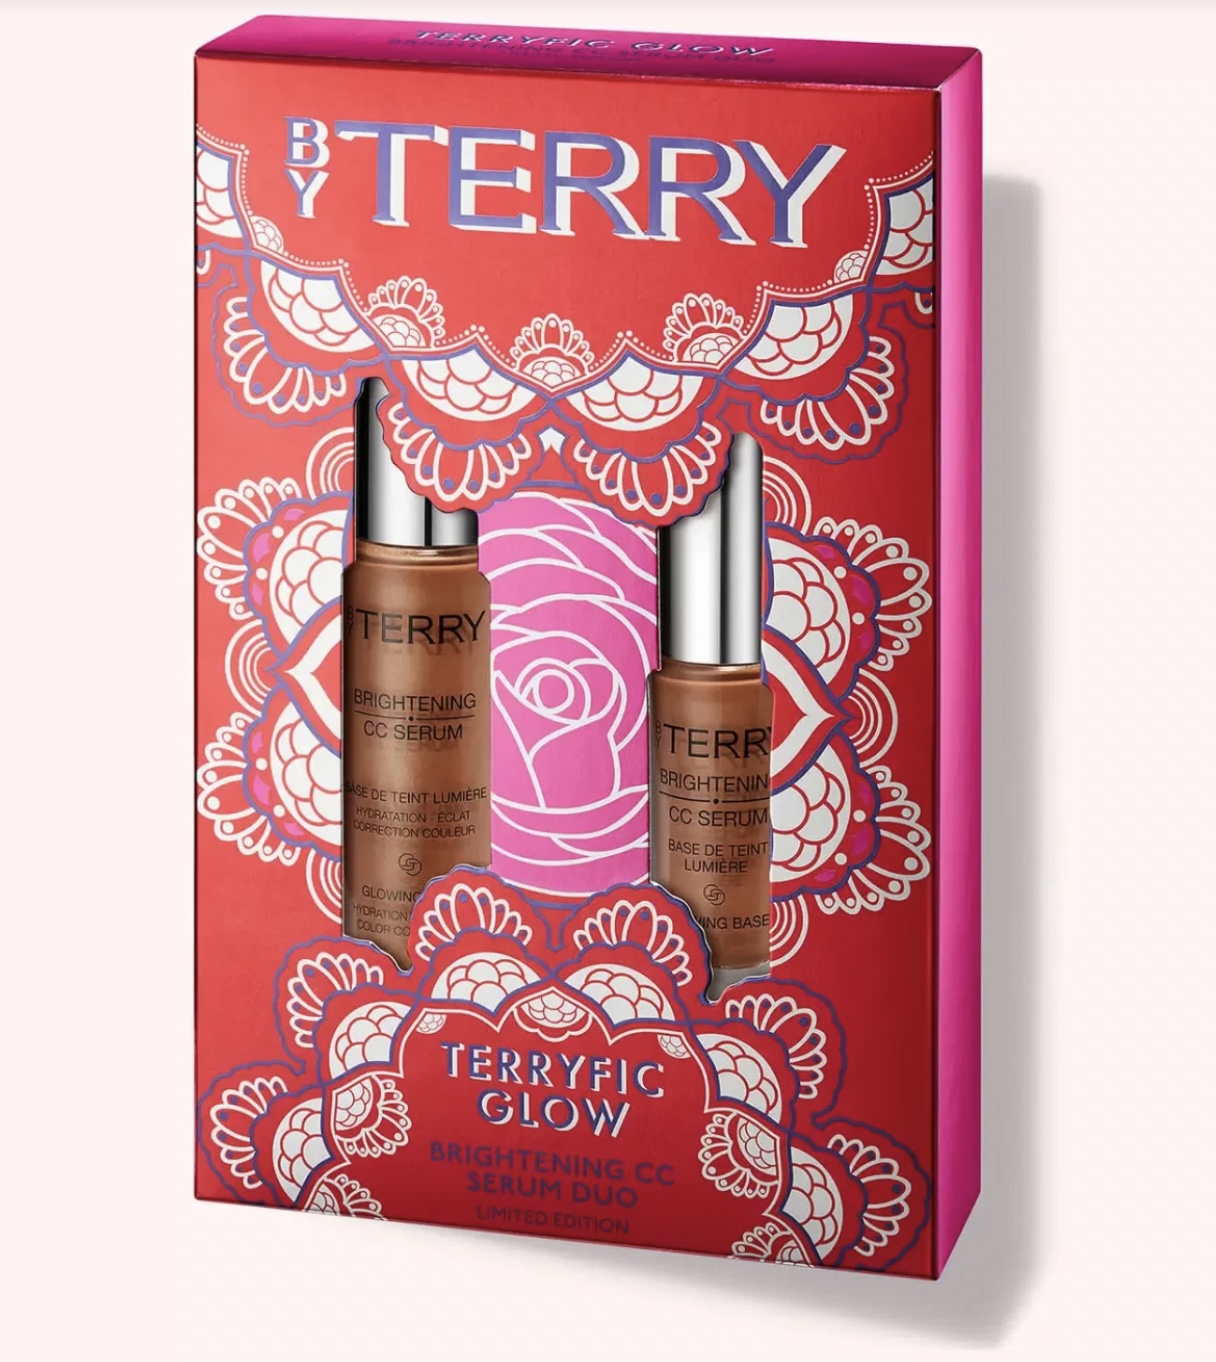 Collection Noël 2022 By Terry Terryfic Glow Brightening CC Serum Duo